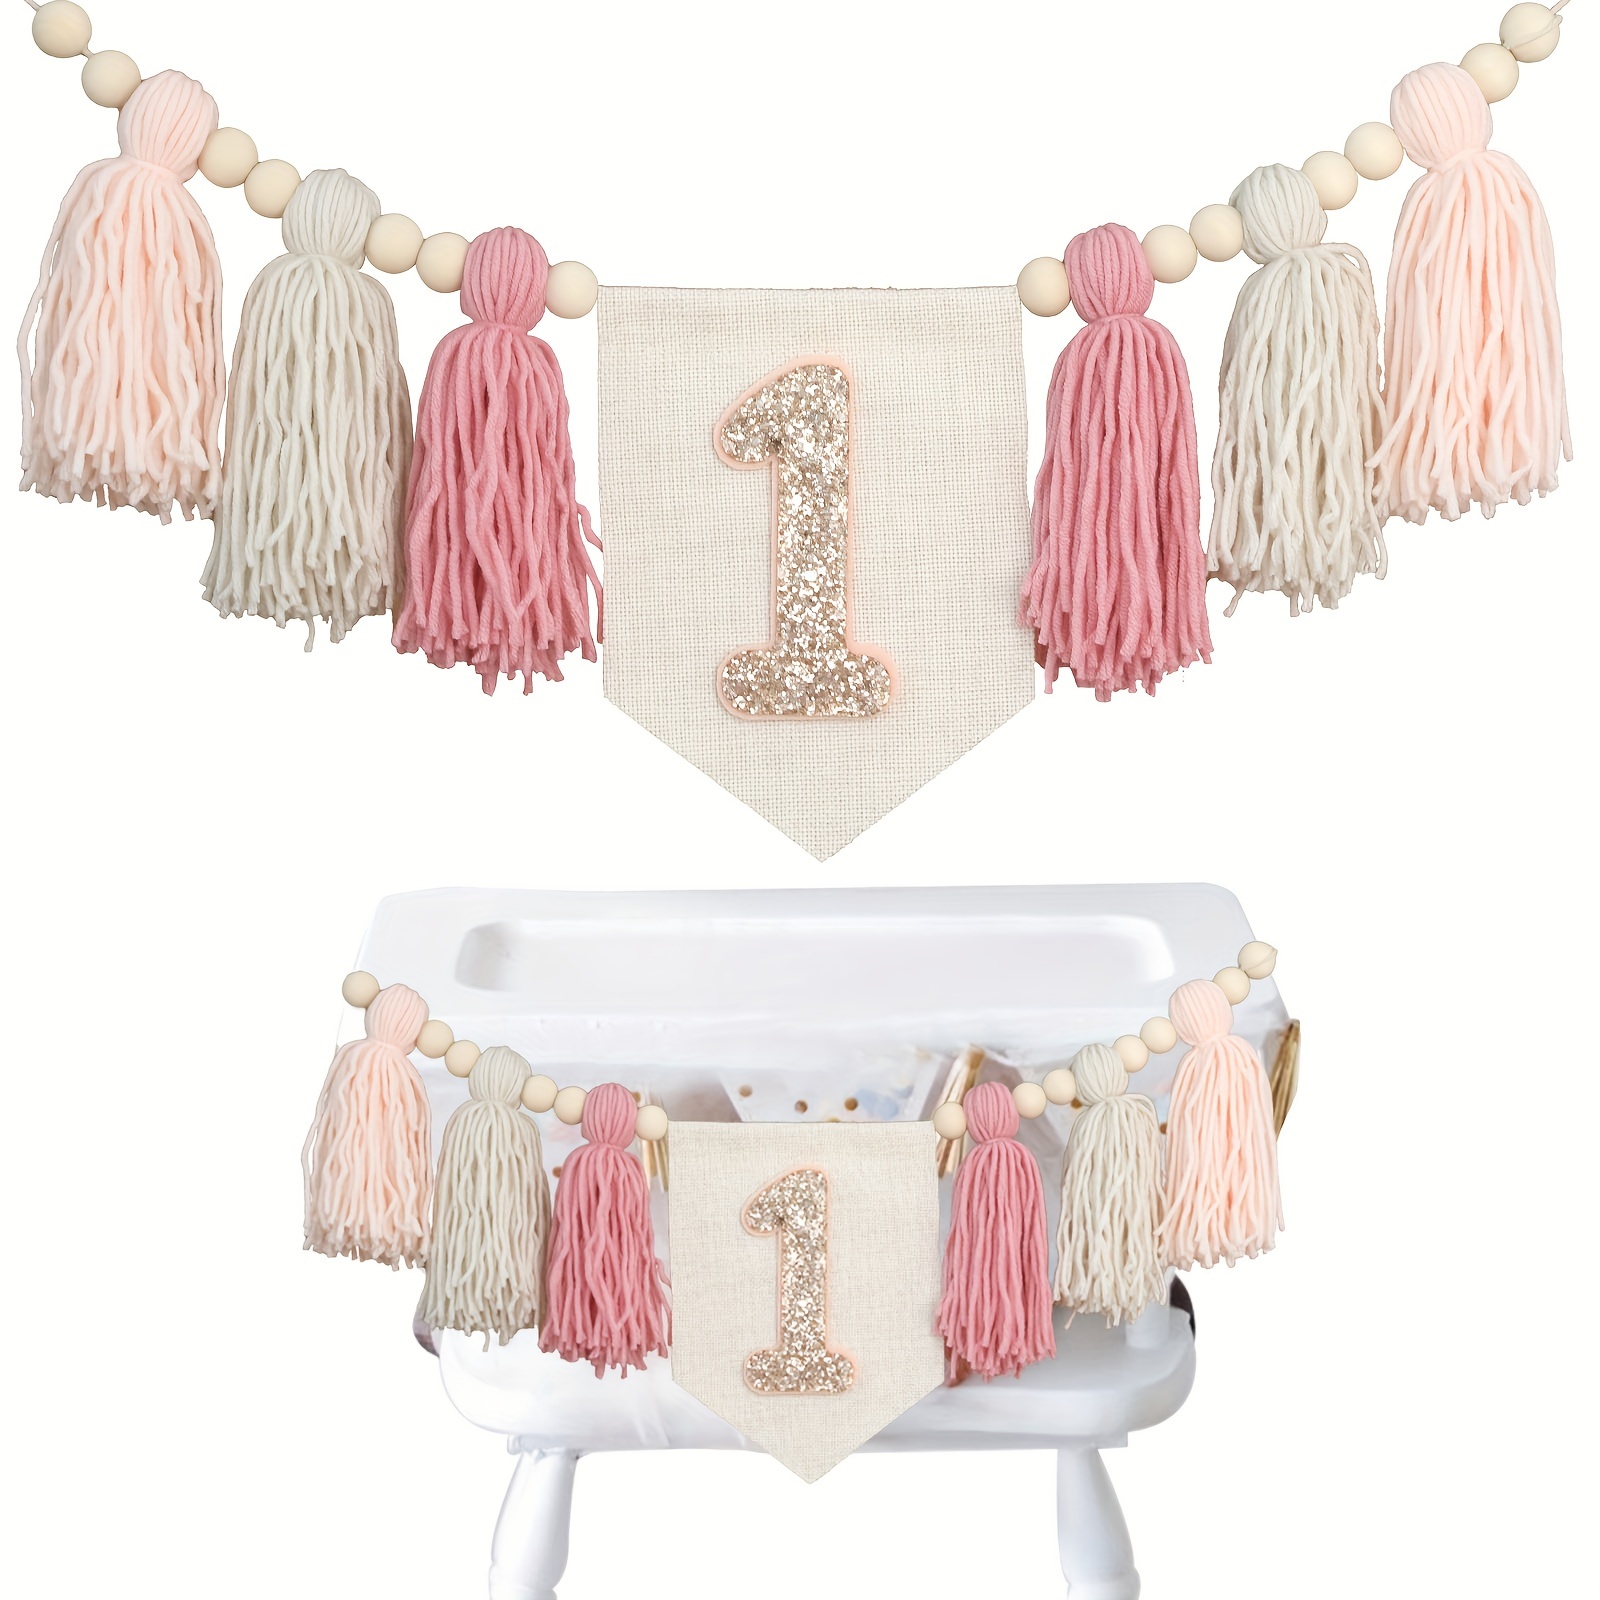 

Bohemian Pink Tassel Garland Banner For 1st Birthday & Baby Shower - Fabric Highchair Decor, Handmade Glitter Number 1 Pennant, Pre-strung For Easy Hanging, Multipurpose Party Accessory